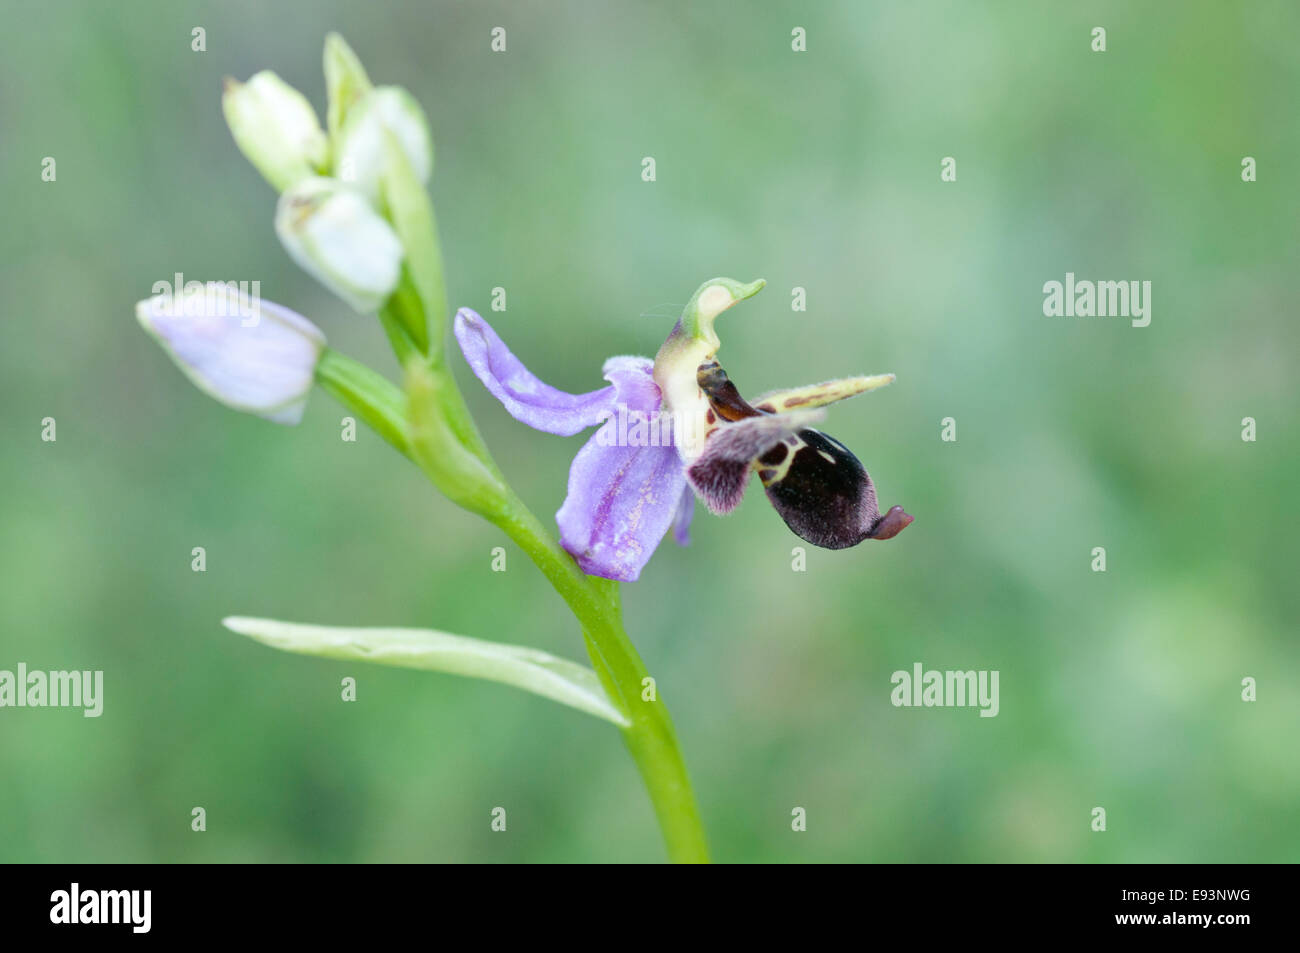 Side view of a single flower of the aptly named  Long Horned Bee Orchid taken at Daday in Turkey Stock Photo